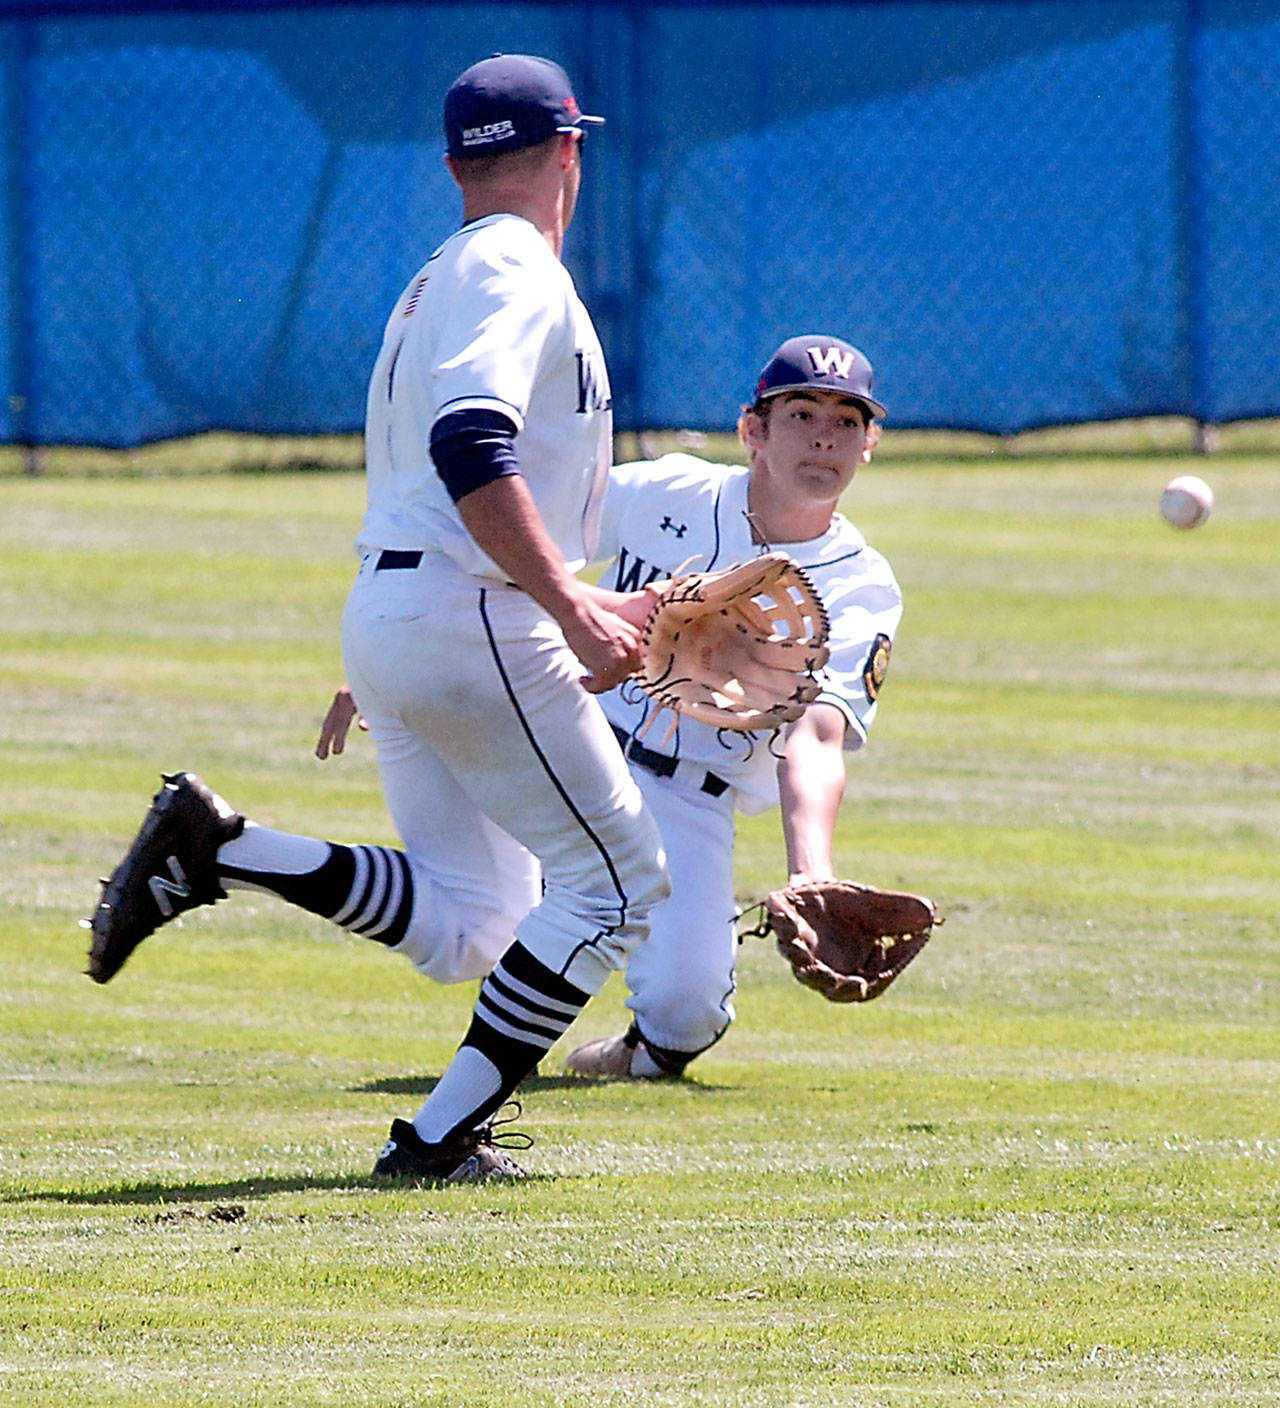 Keith Thorpe/Peninsula Daily News Wilder center fielder Tyler Bowen, right, reaches for a fly ball as left fielder Carson Jackson looks on during the first game of a double header against Lakeside Recovery on Wednesday at Port Angeles Civic Field.